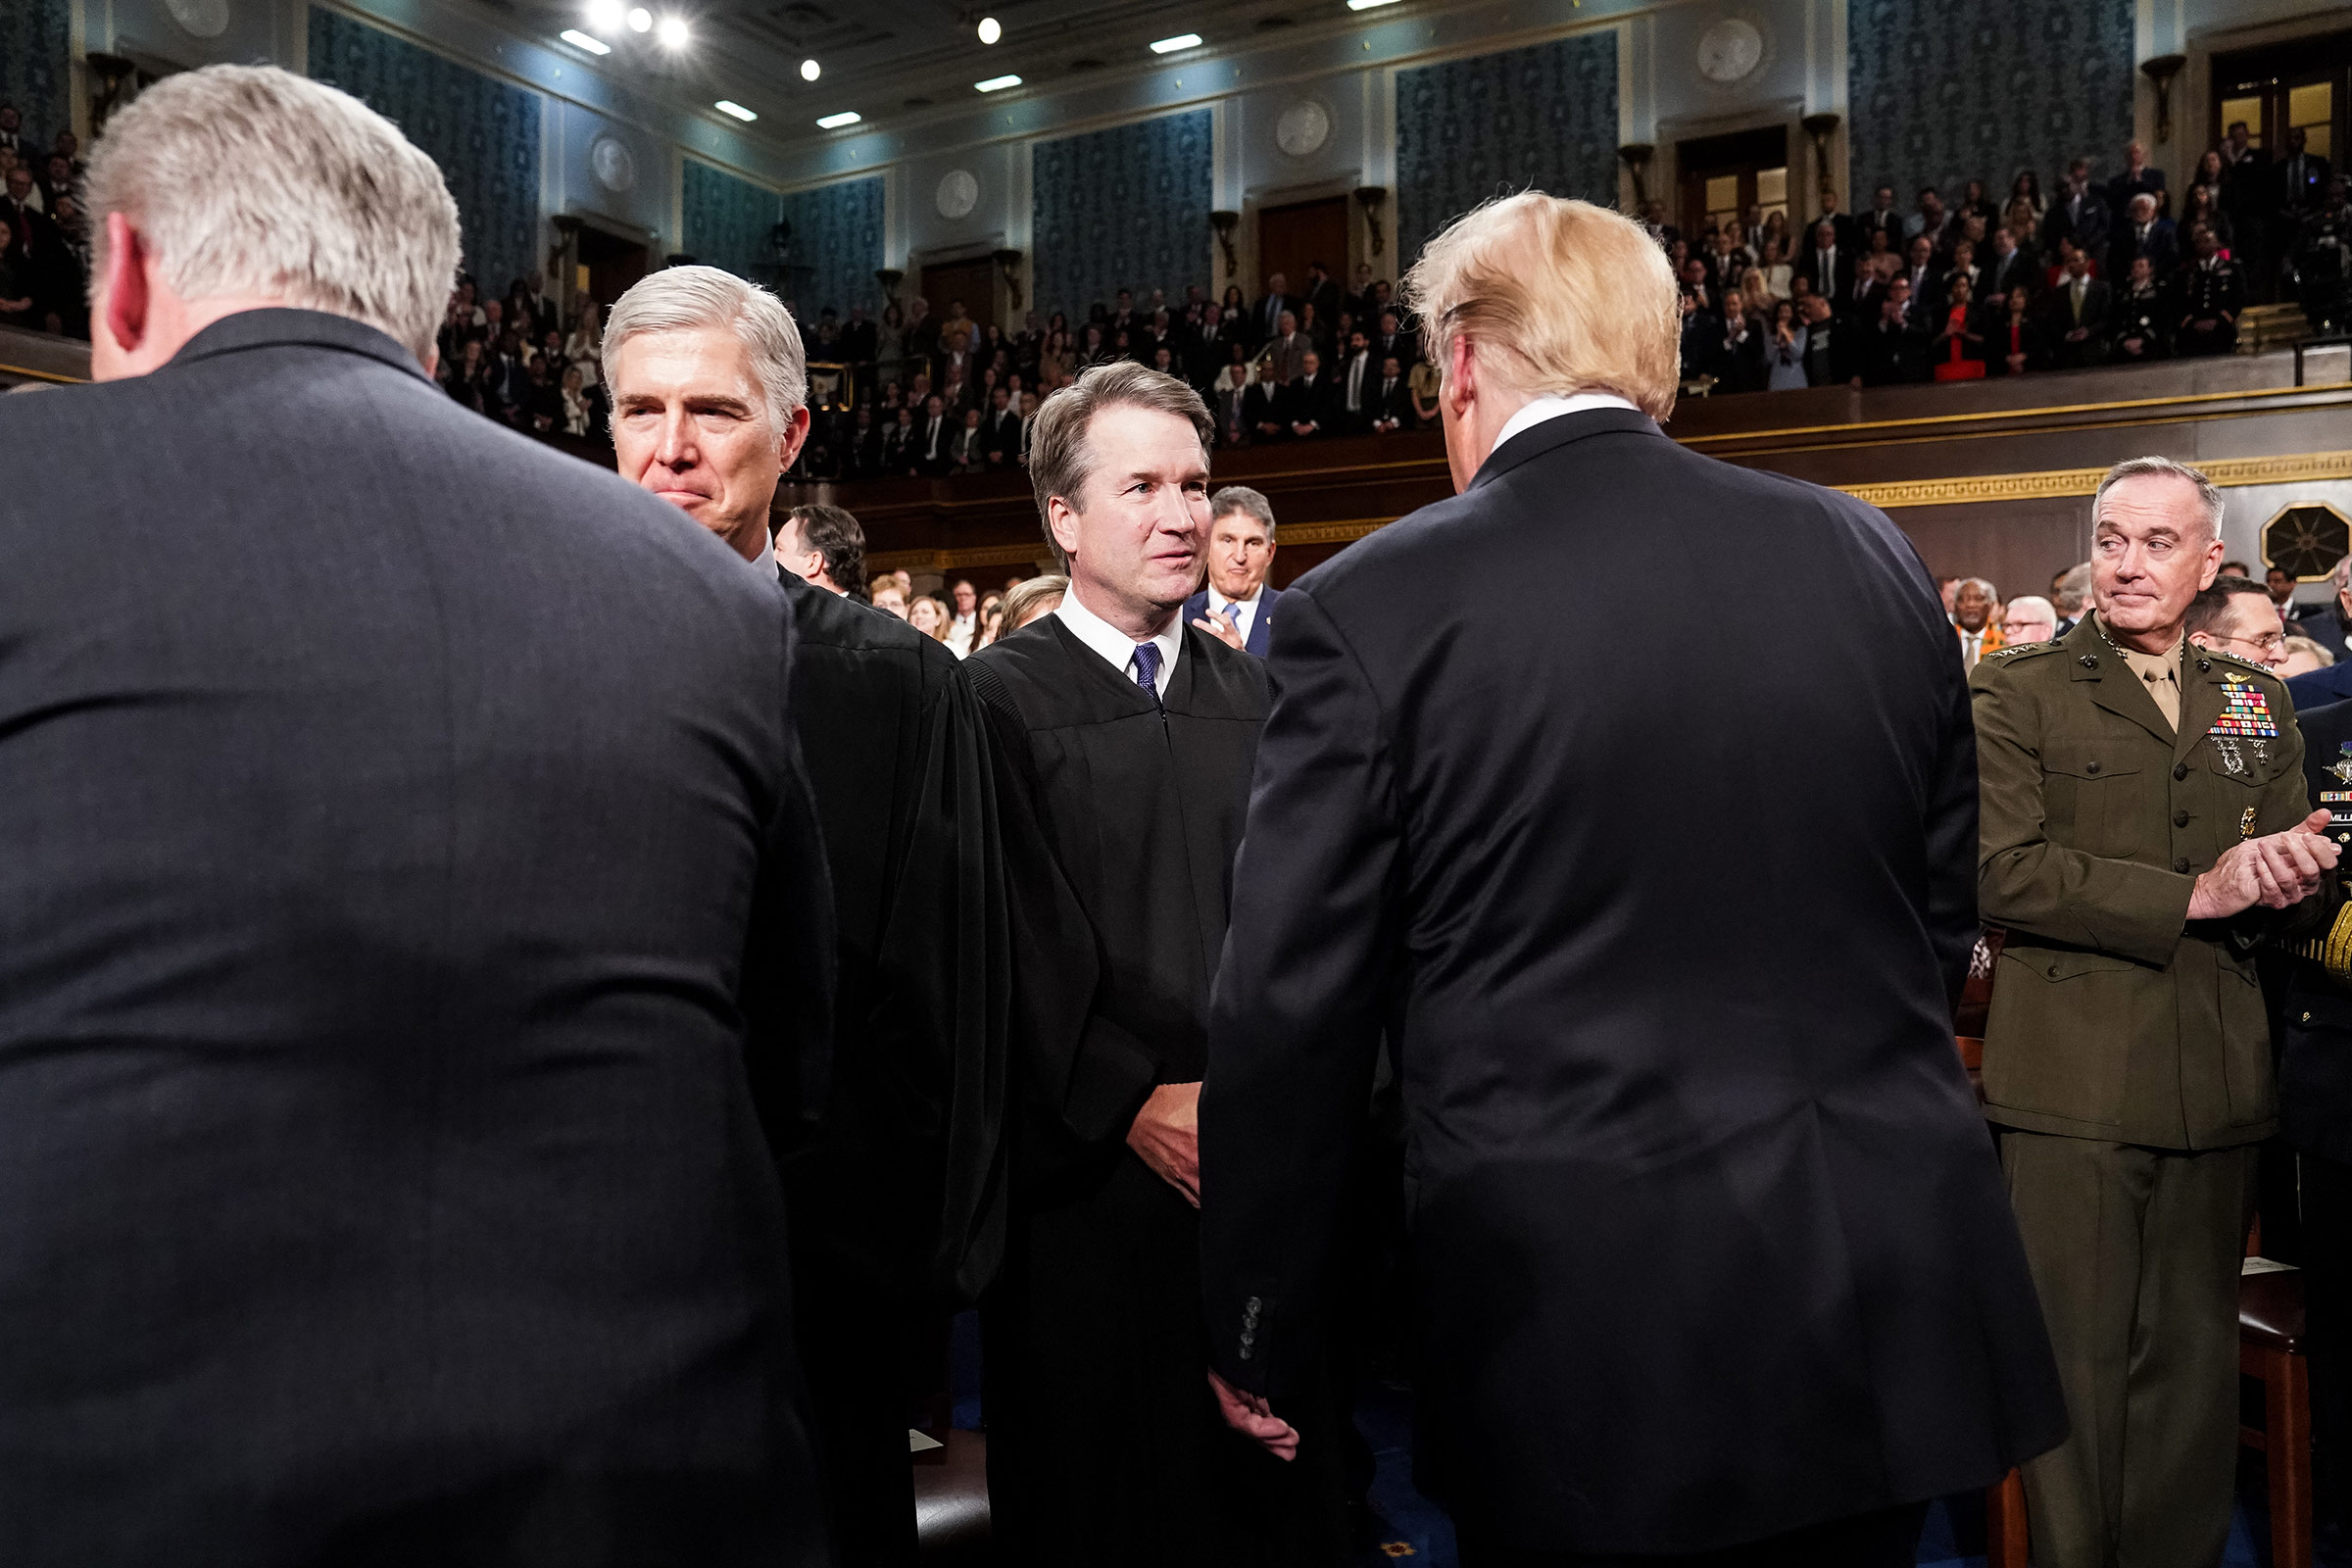 Supreme Court Justice Brett Kavanaugh shook hands with President Donald Trump before the State of the Union address at the Capitol in Washington, DC on February 5, 2019. (Martin H. Simon—Pool/Redux)